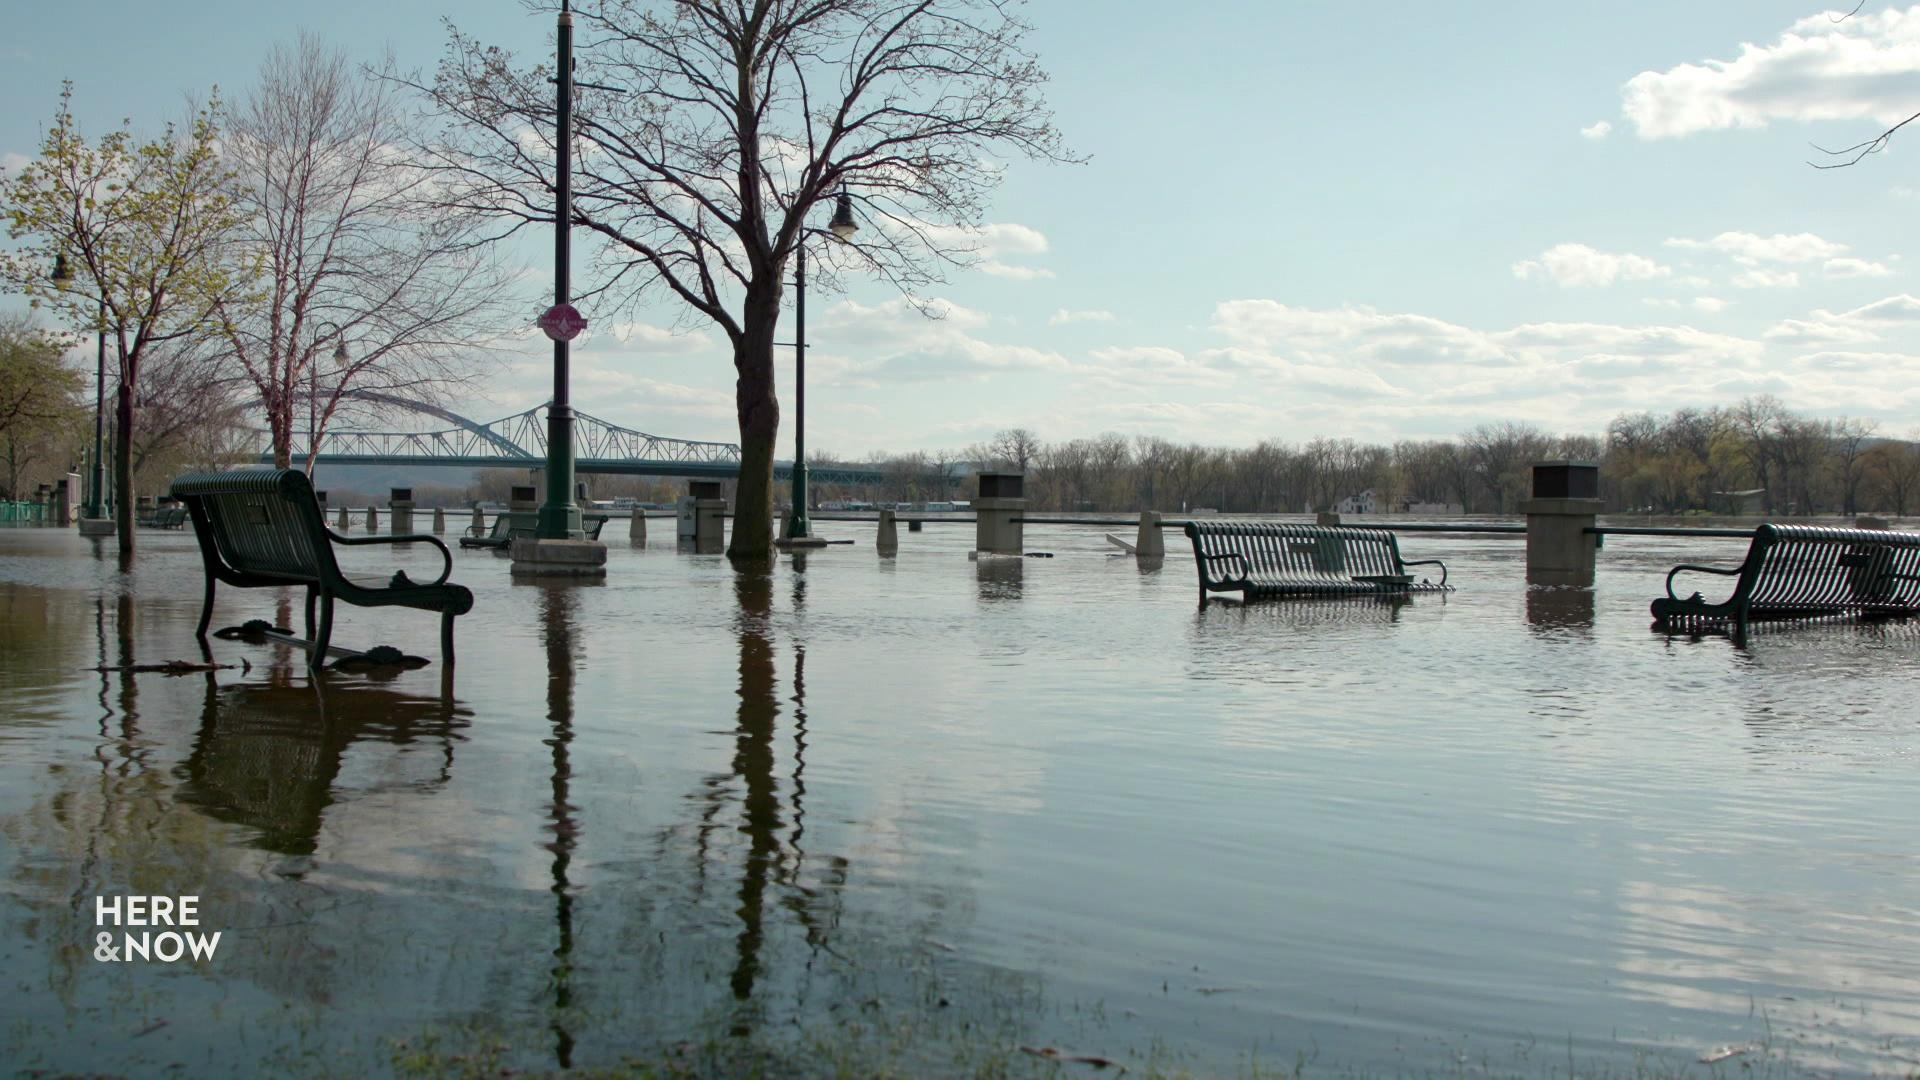 A still image from a video shows a flooded park with benches and trees partially underwater.